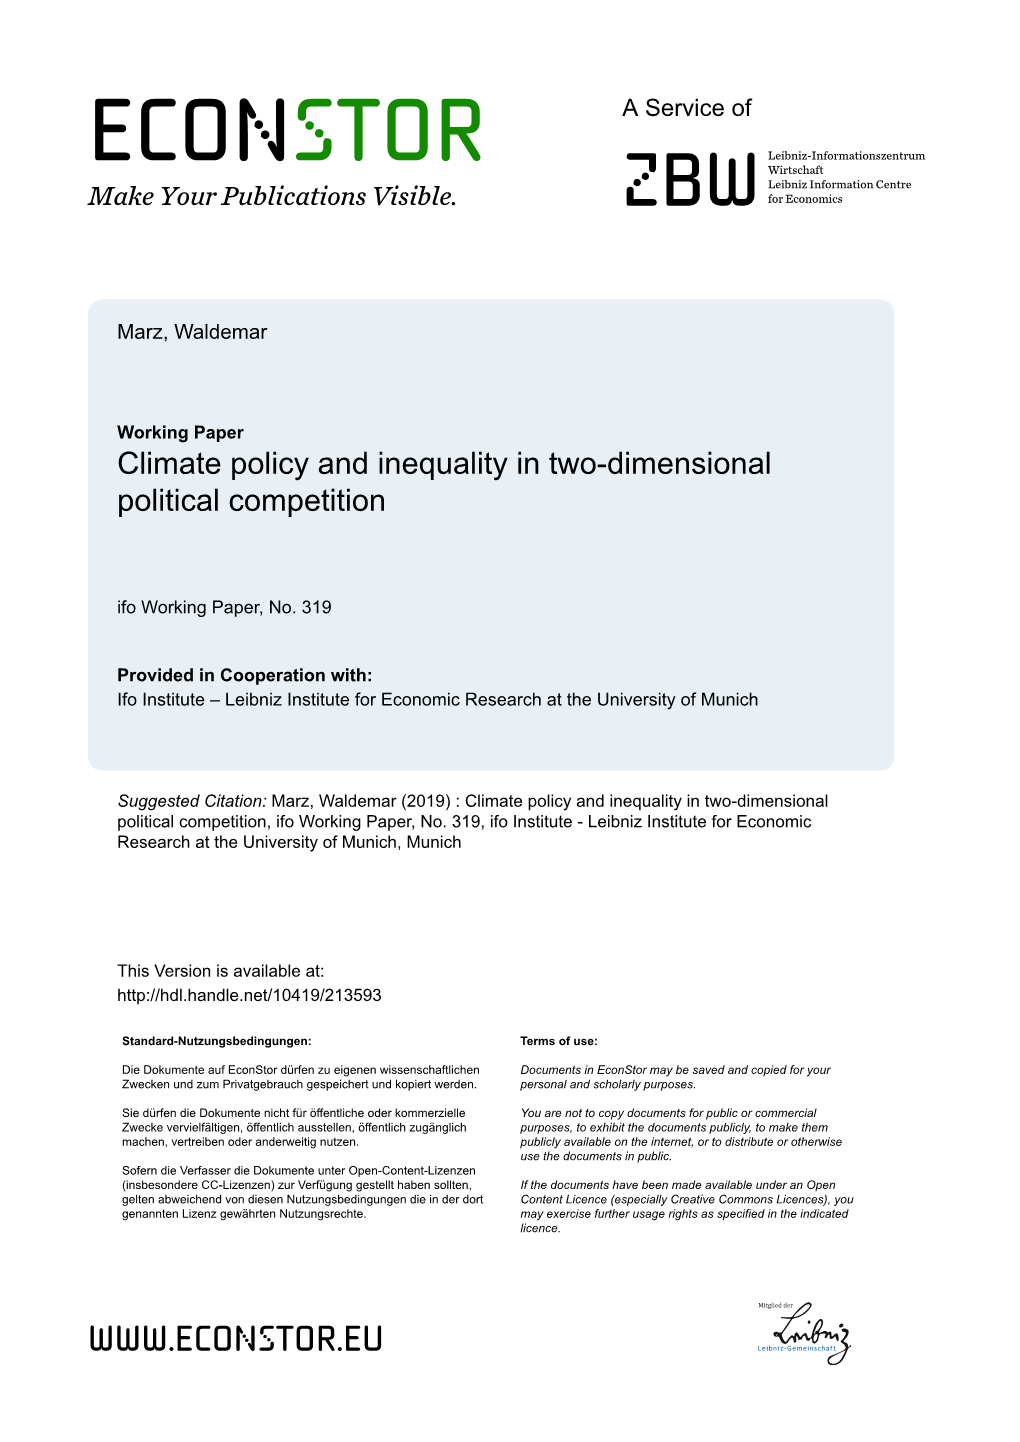 Climate Policy and Inequality in Two-Dimensional Political Competition